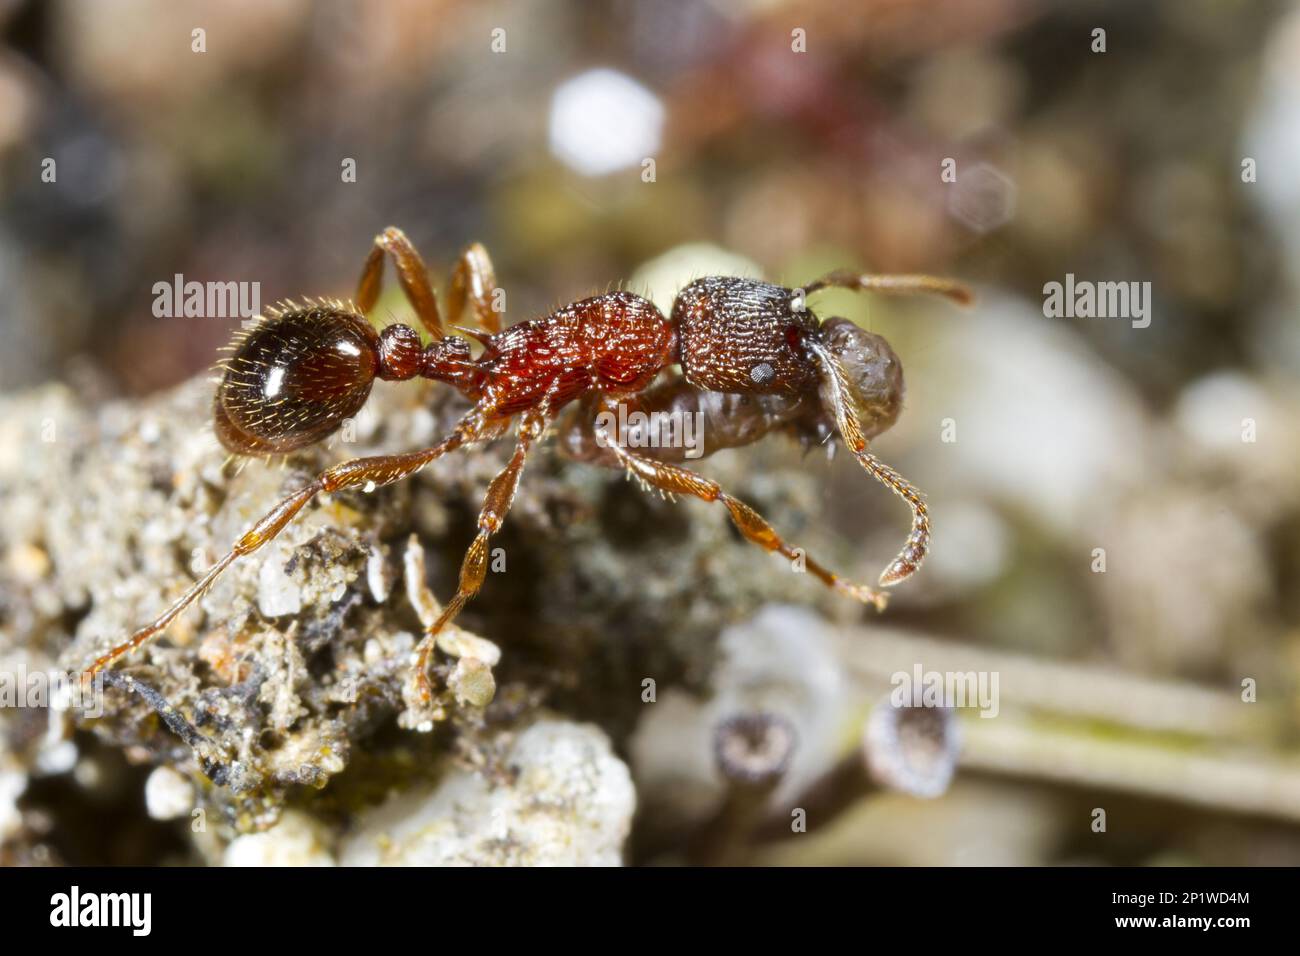 Knot ant, Knot ants, Other animals, Insects, Animals, Ants, Ant Myrmica sulcinodis adult worker carrying prey. Shropshire, England, Great Britain Stock Photo